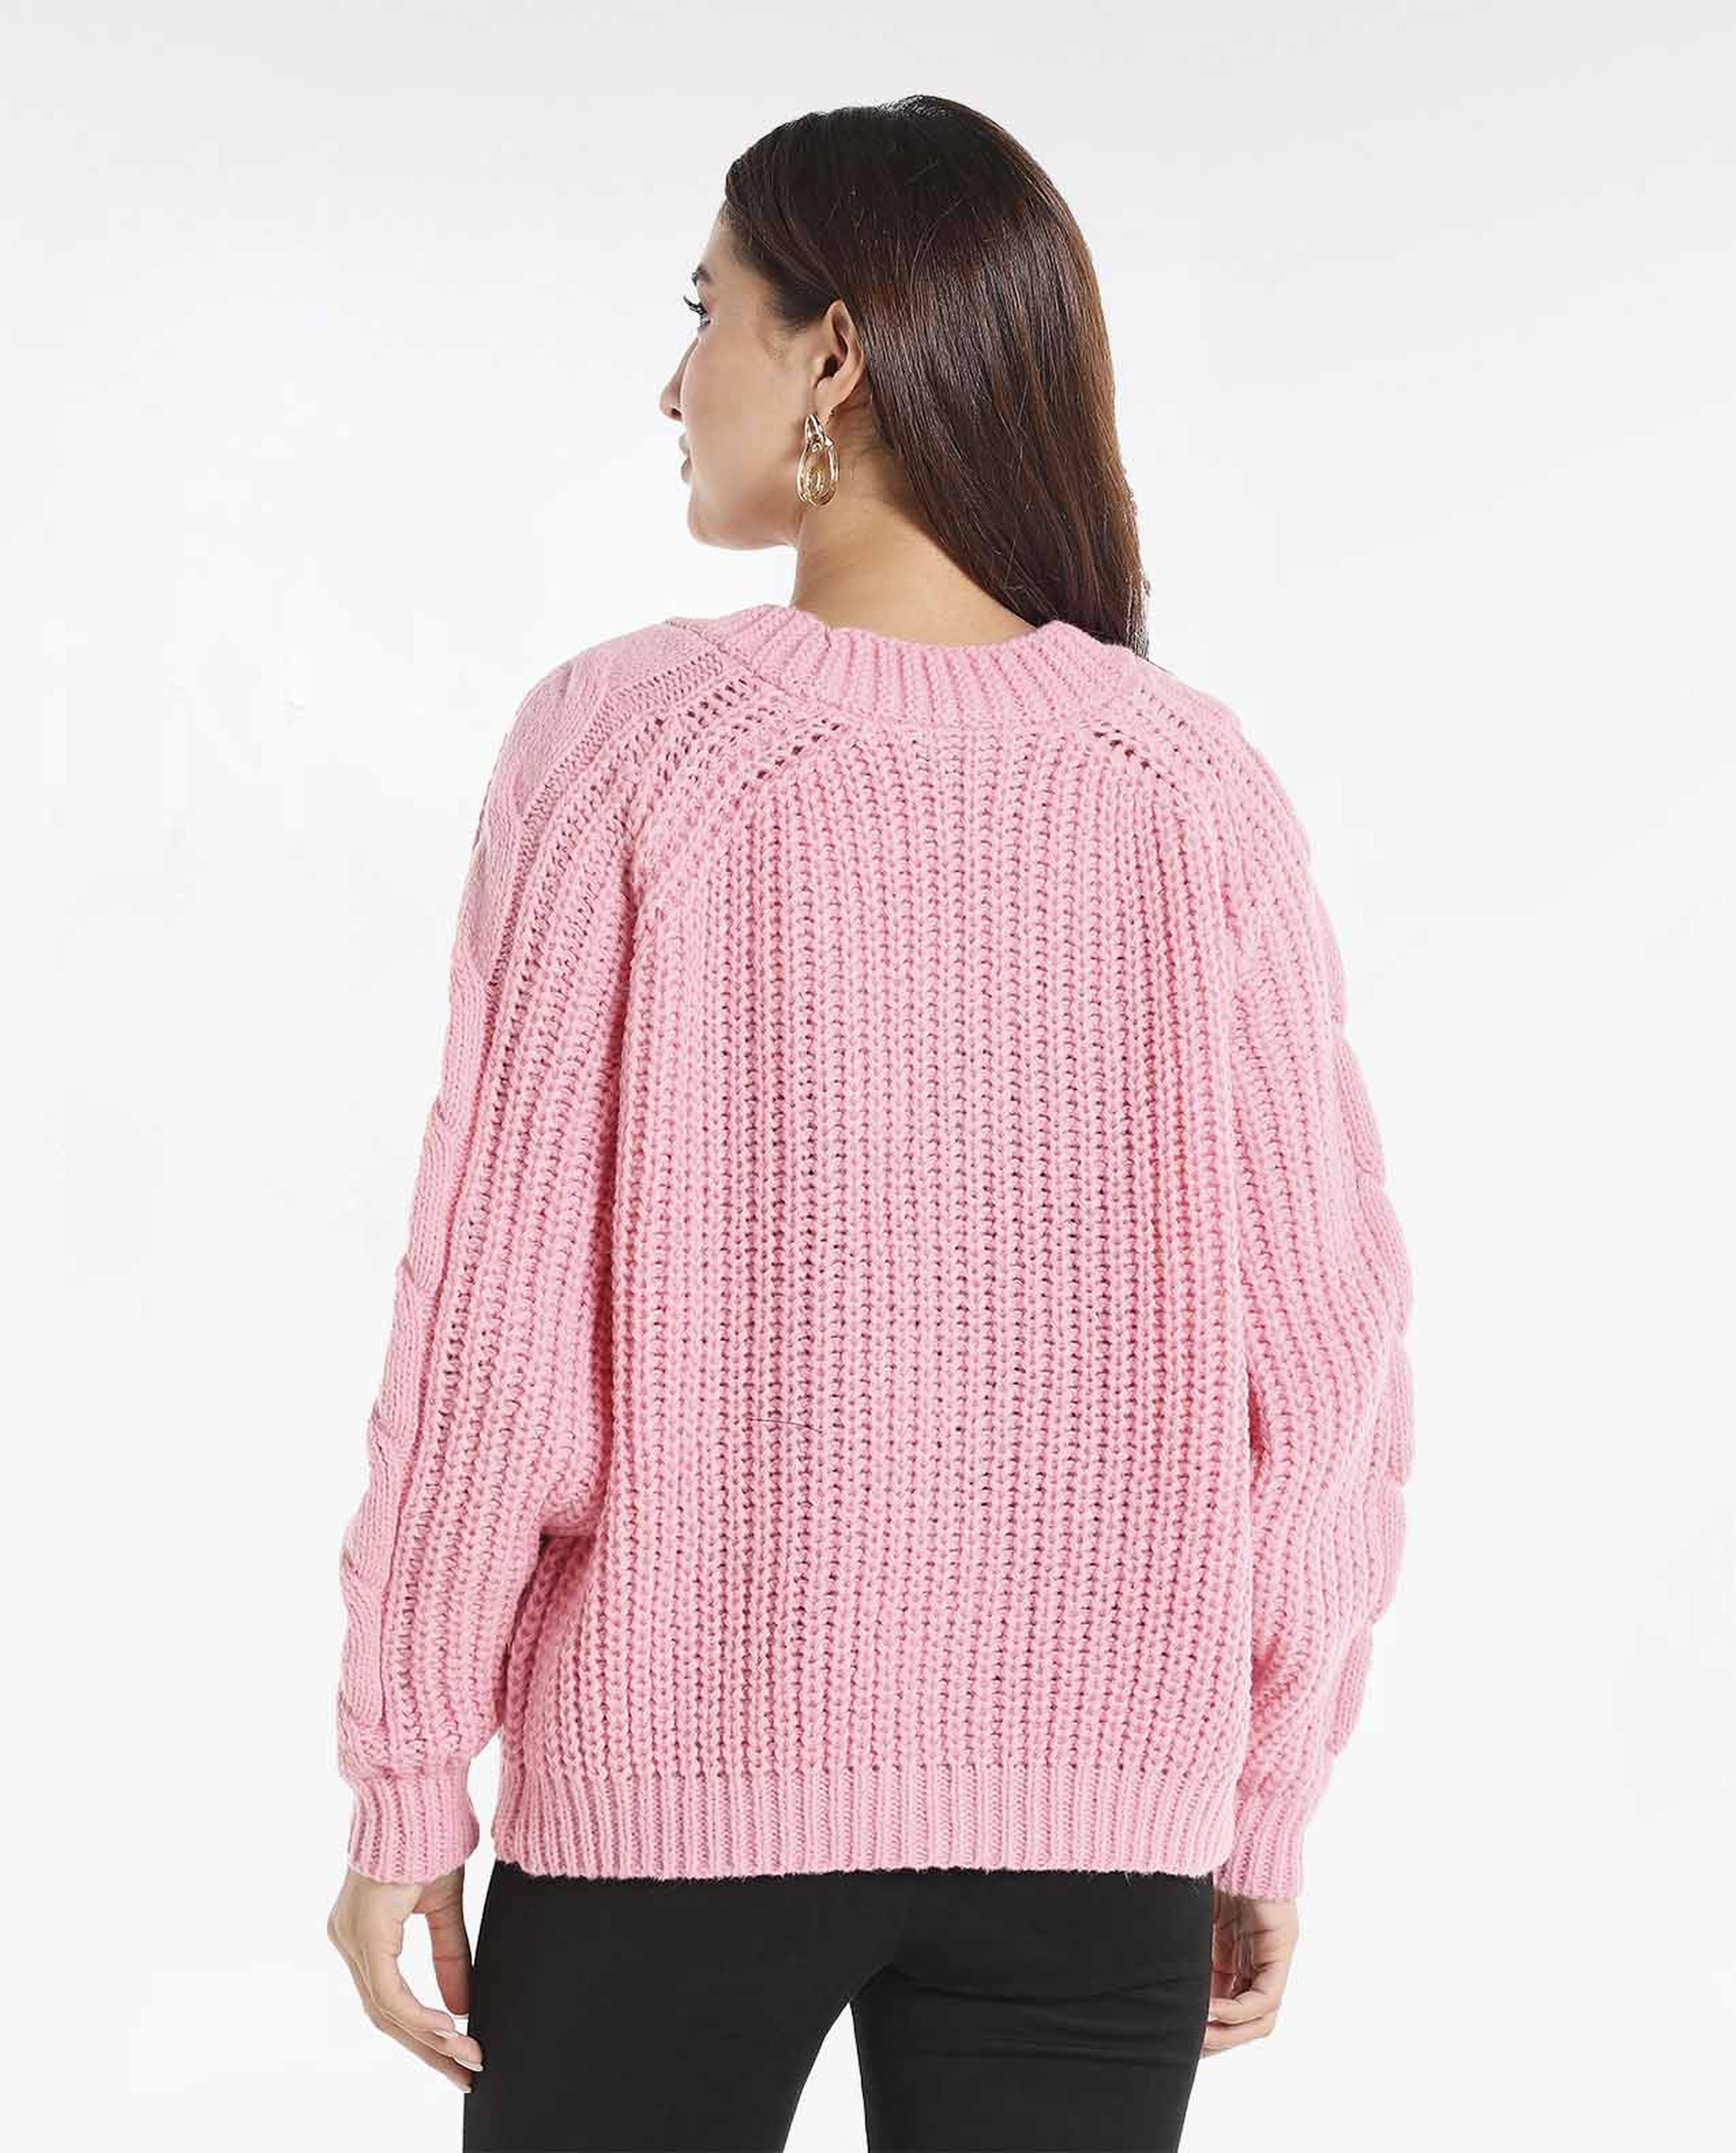 Cable Knit Front-Open Shrug with Long Sleeves